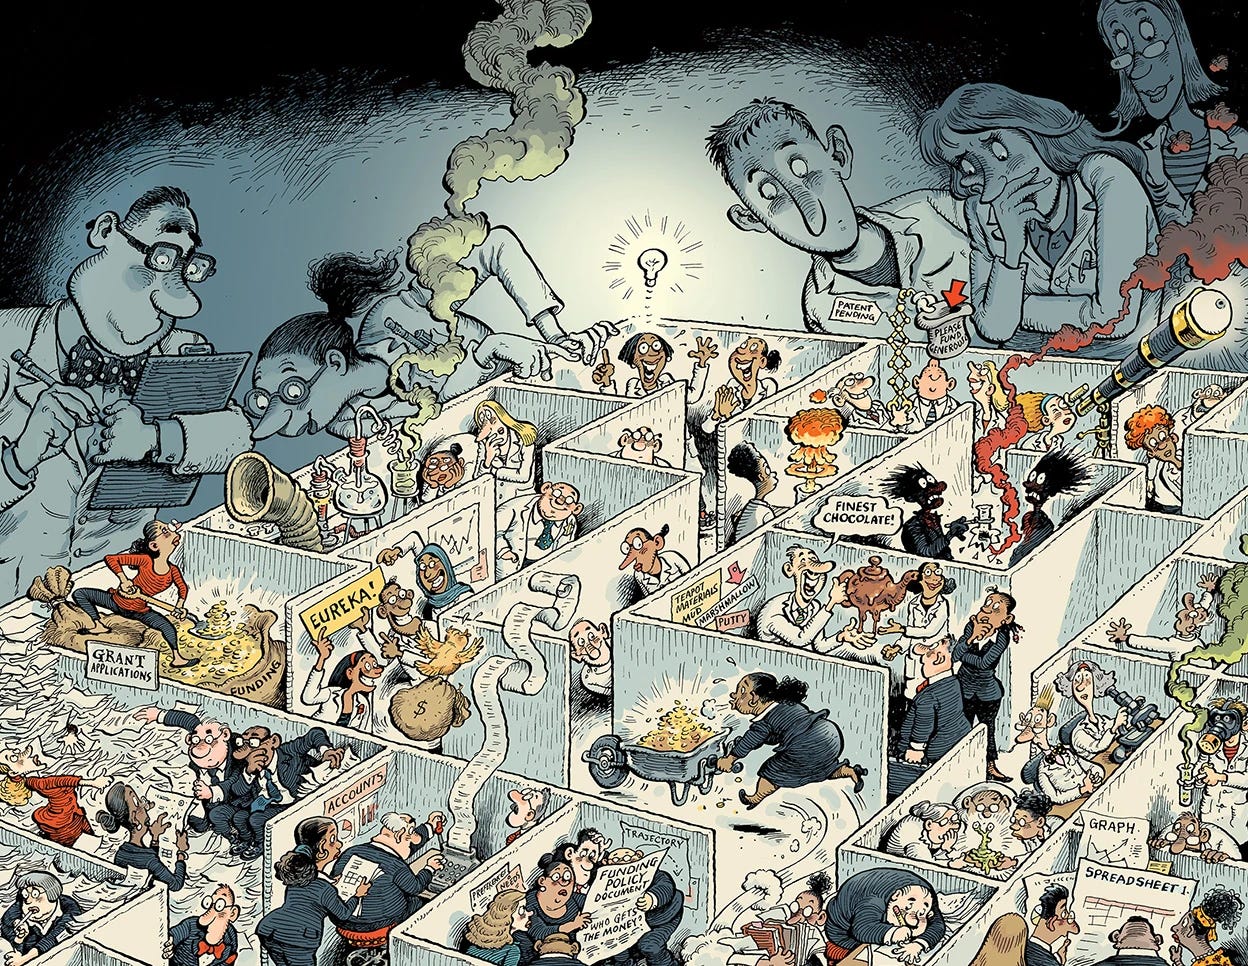 Cartoon, view from above of a maze-like series of office cubicles: scientists in white coats doing experiments, accountants tallying the cost, funders sifting through piles of grant applications. Above, giant scientists in white lab coats observe and take notes